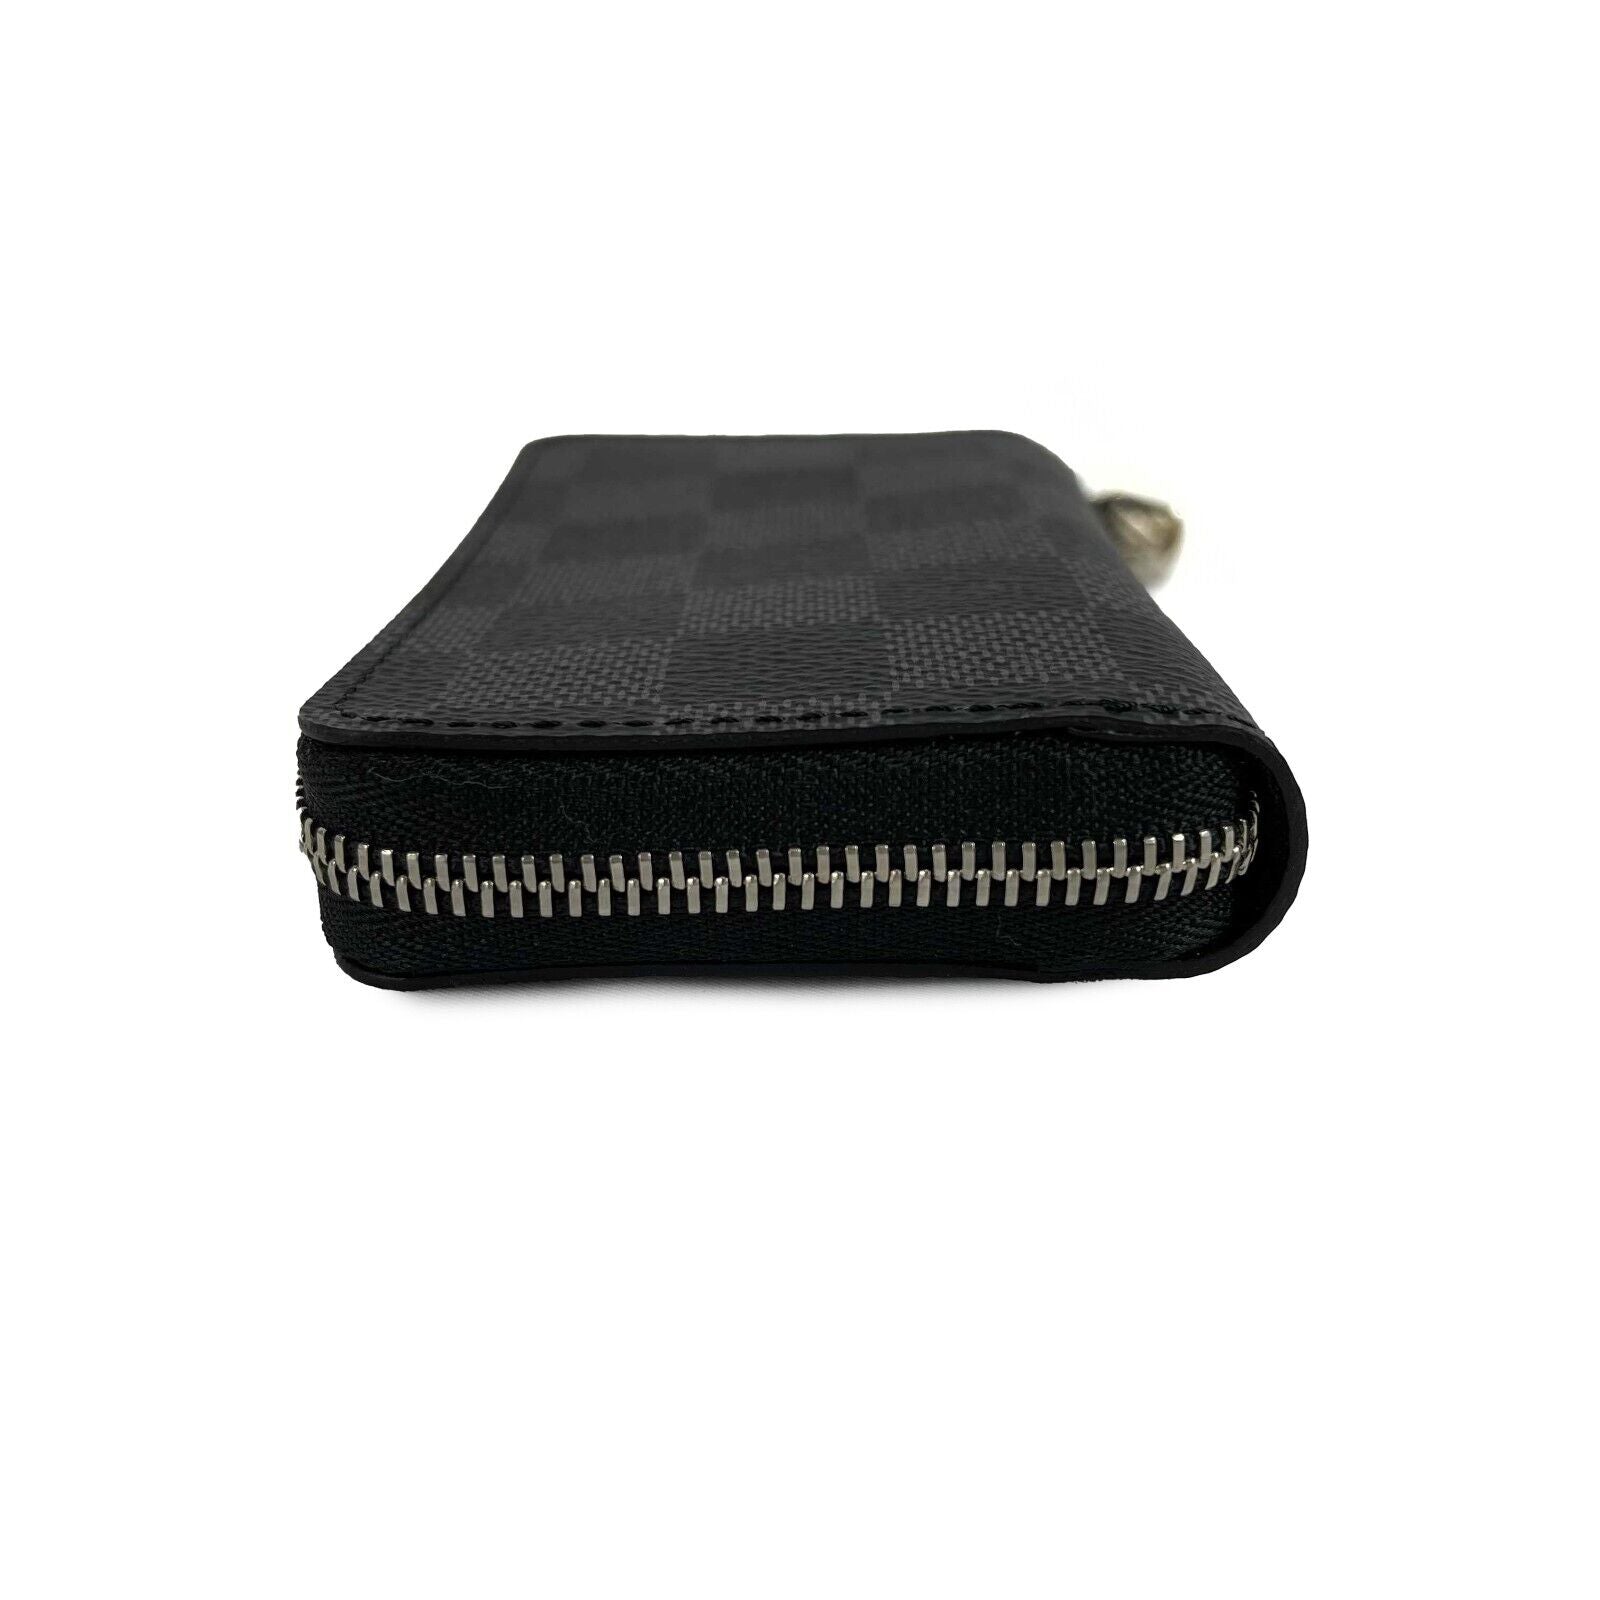 Vintage Leather Coin Purse: Stylish Mens/Womens Purses With Keychain,  Wallet, Dust Bag #6265X From Linguan, $23.81 | DHgate.Com